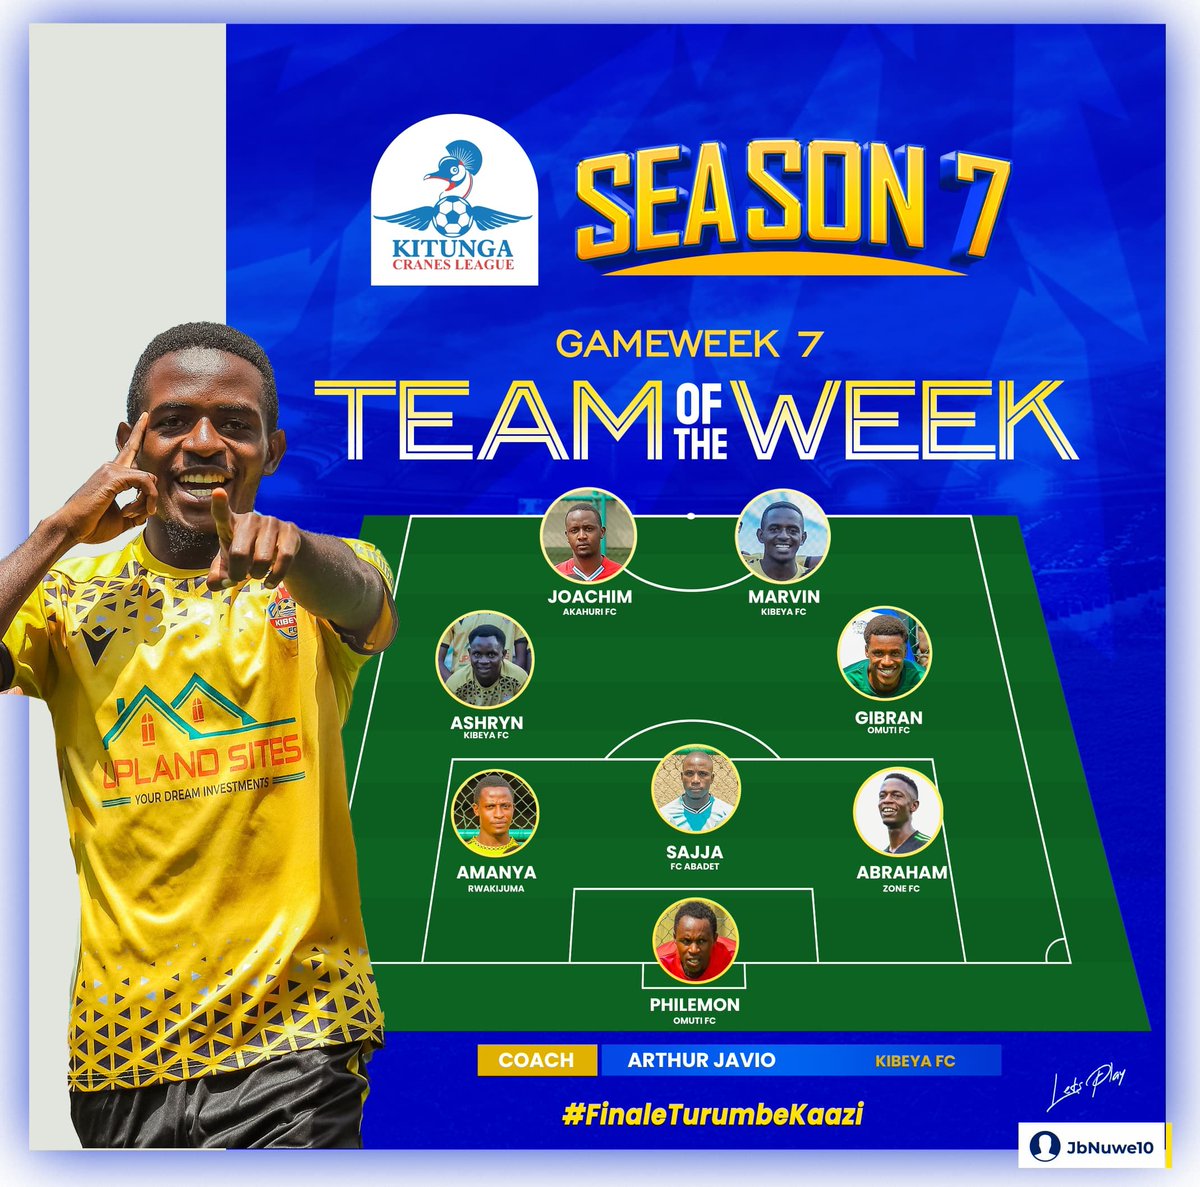 As said before we thank God 😊 #teamoftheweek here we go,  let's catch up on Sunday and we try again